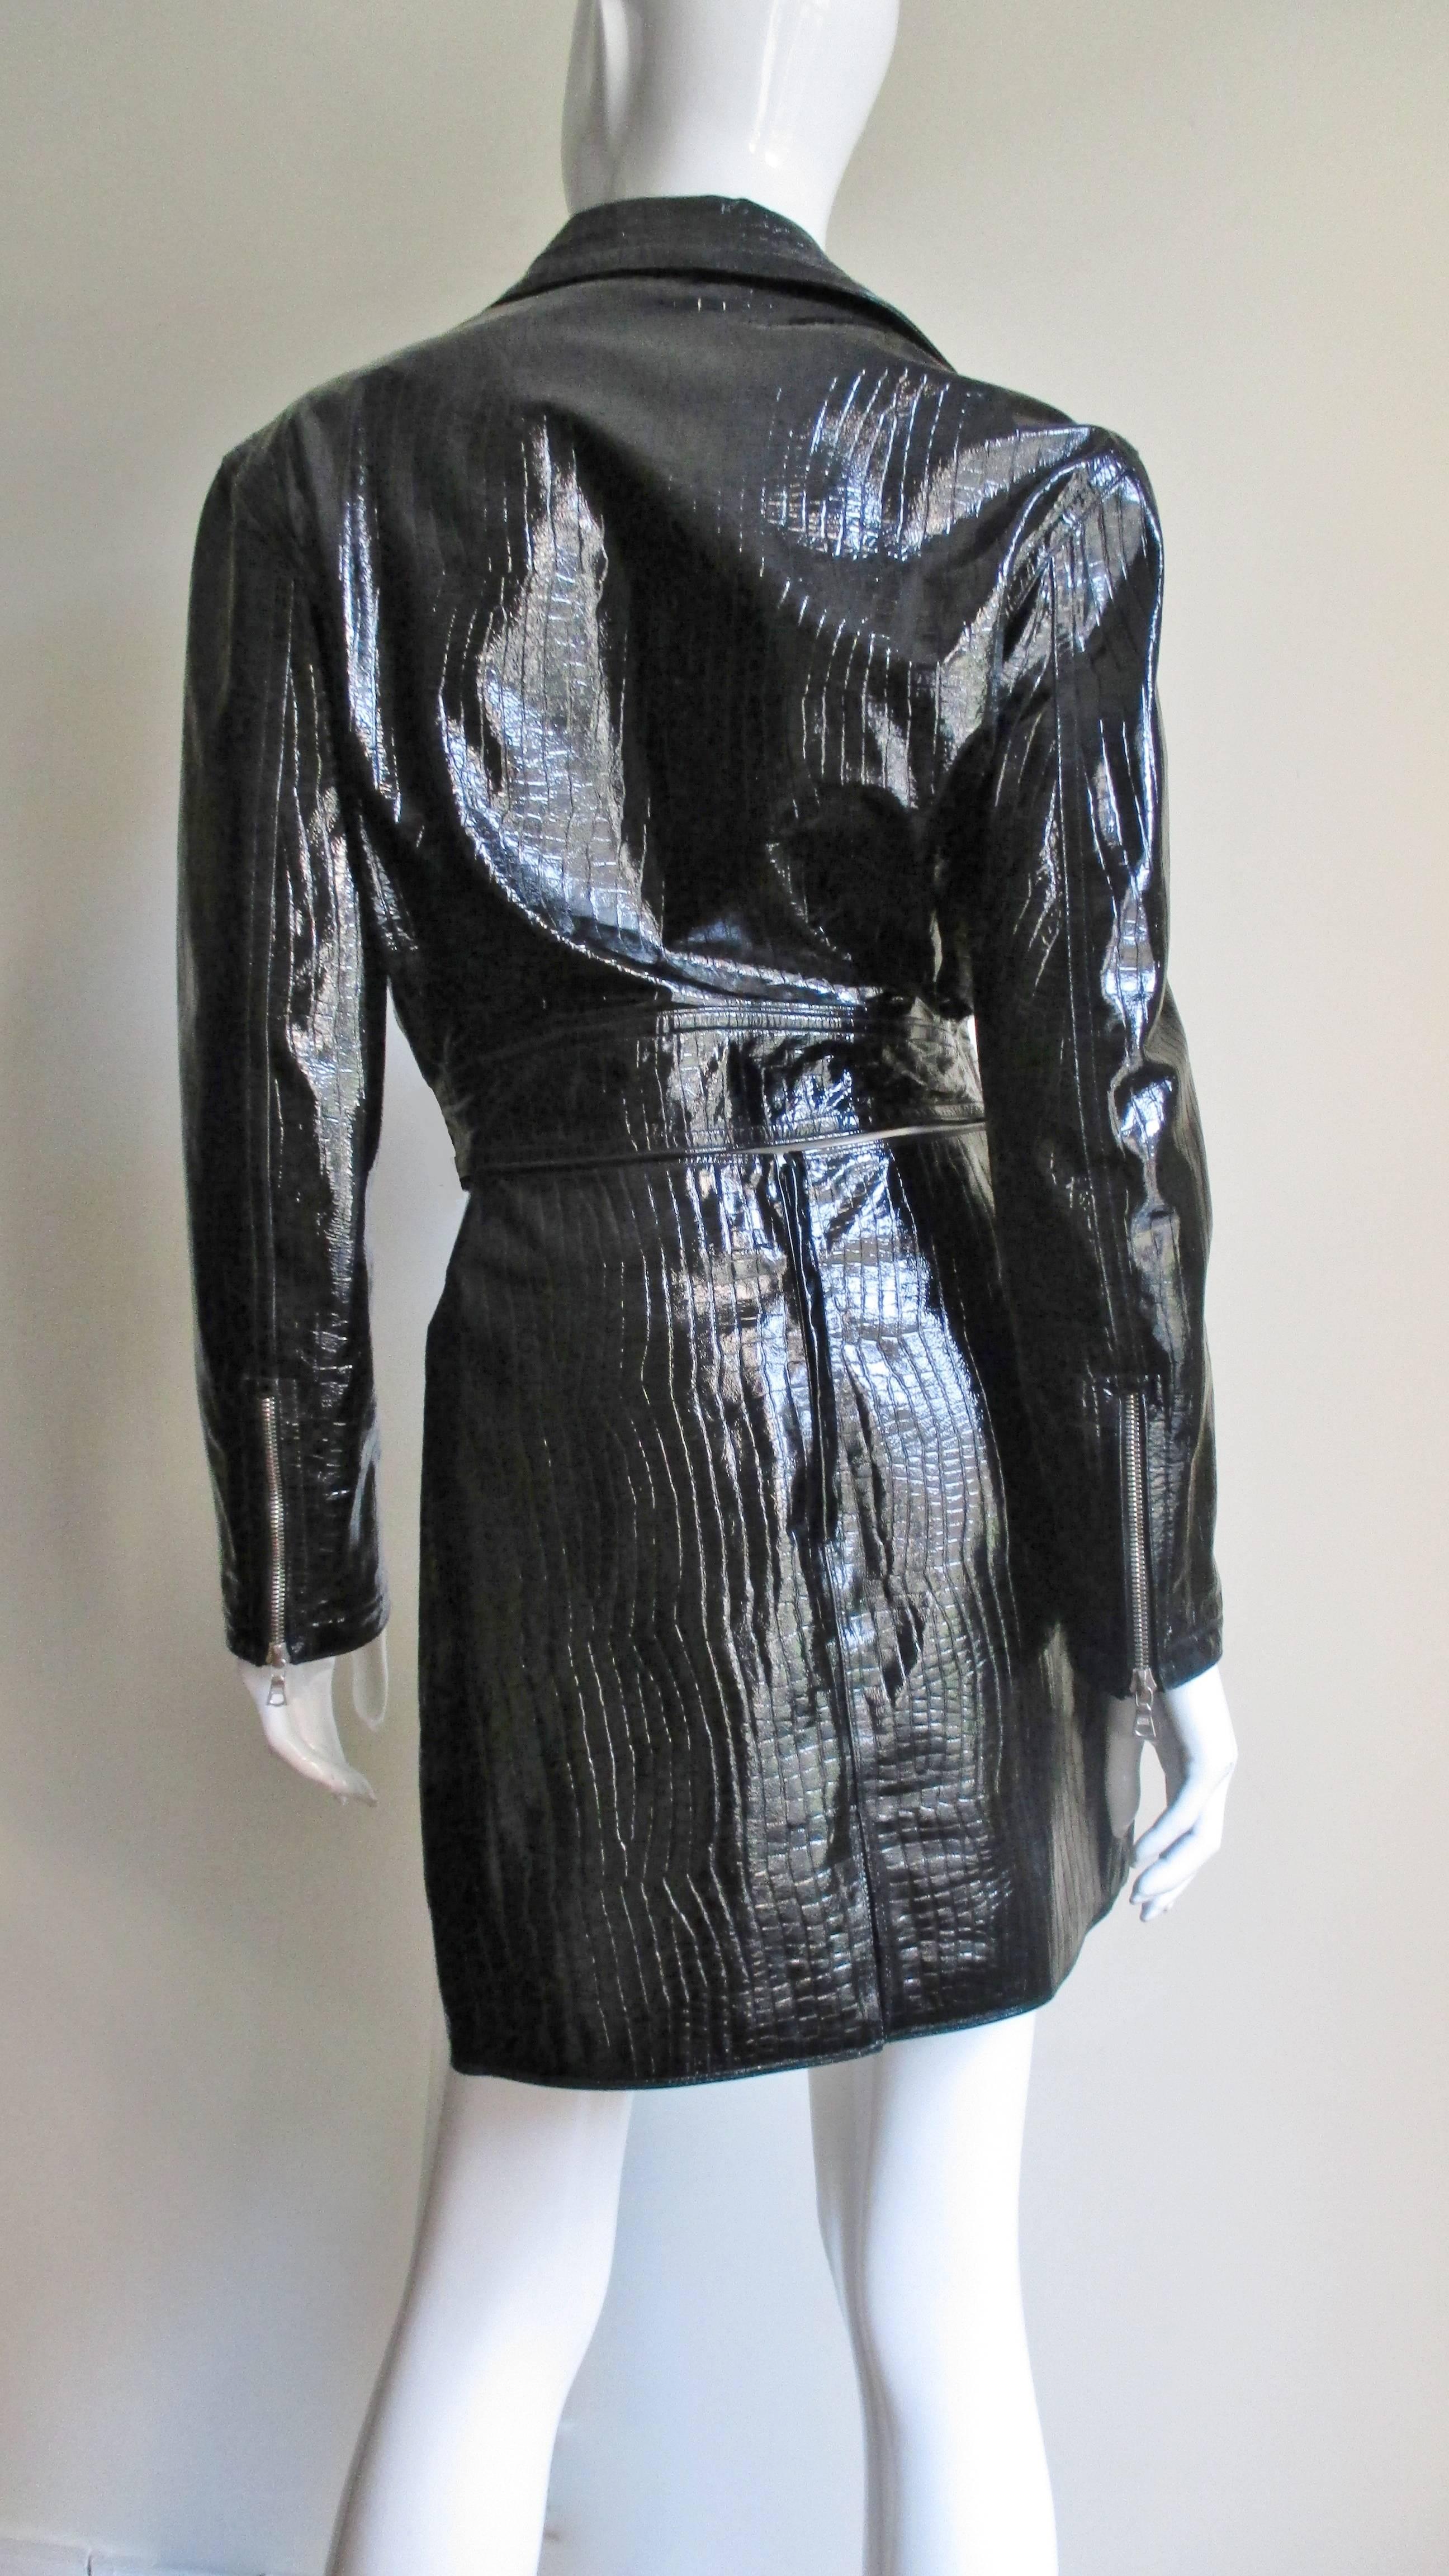 Gianni Versace Leather Motorcycle Jacket and Skirt A/W 1994 For Sale 2